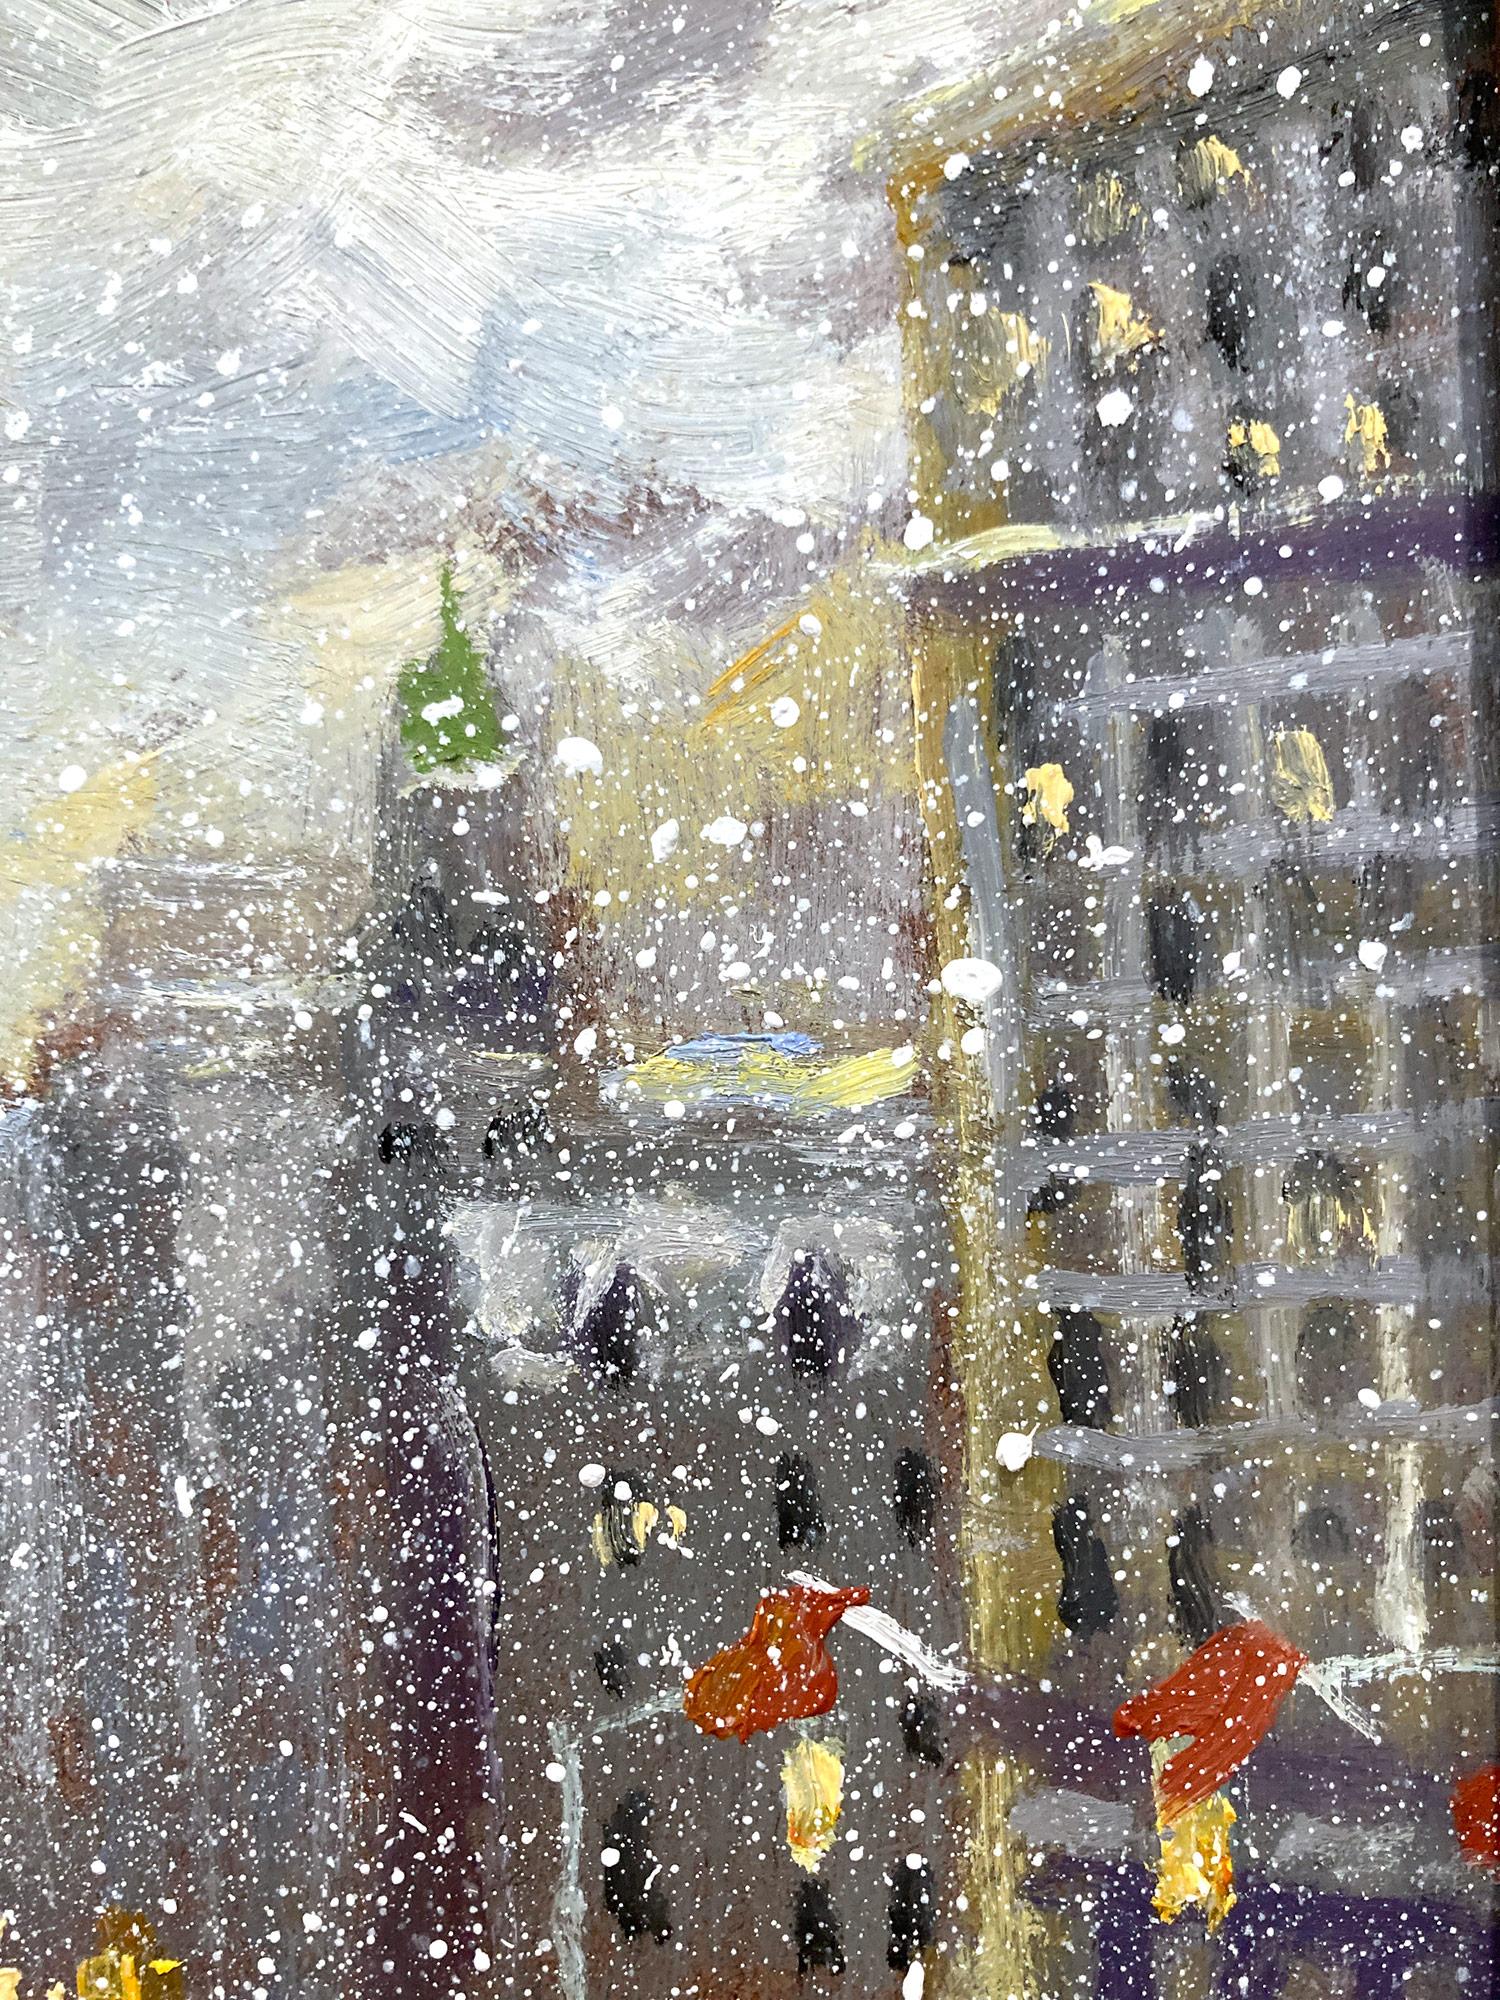 Impressionist New York City winter city-scene depicting Flatiron at Sunset in New York City. Cars and pedestrians are painted in a most intimate, yet energetic way. Christopher is known for capturing the beauty and simplicity of an earlier time of